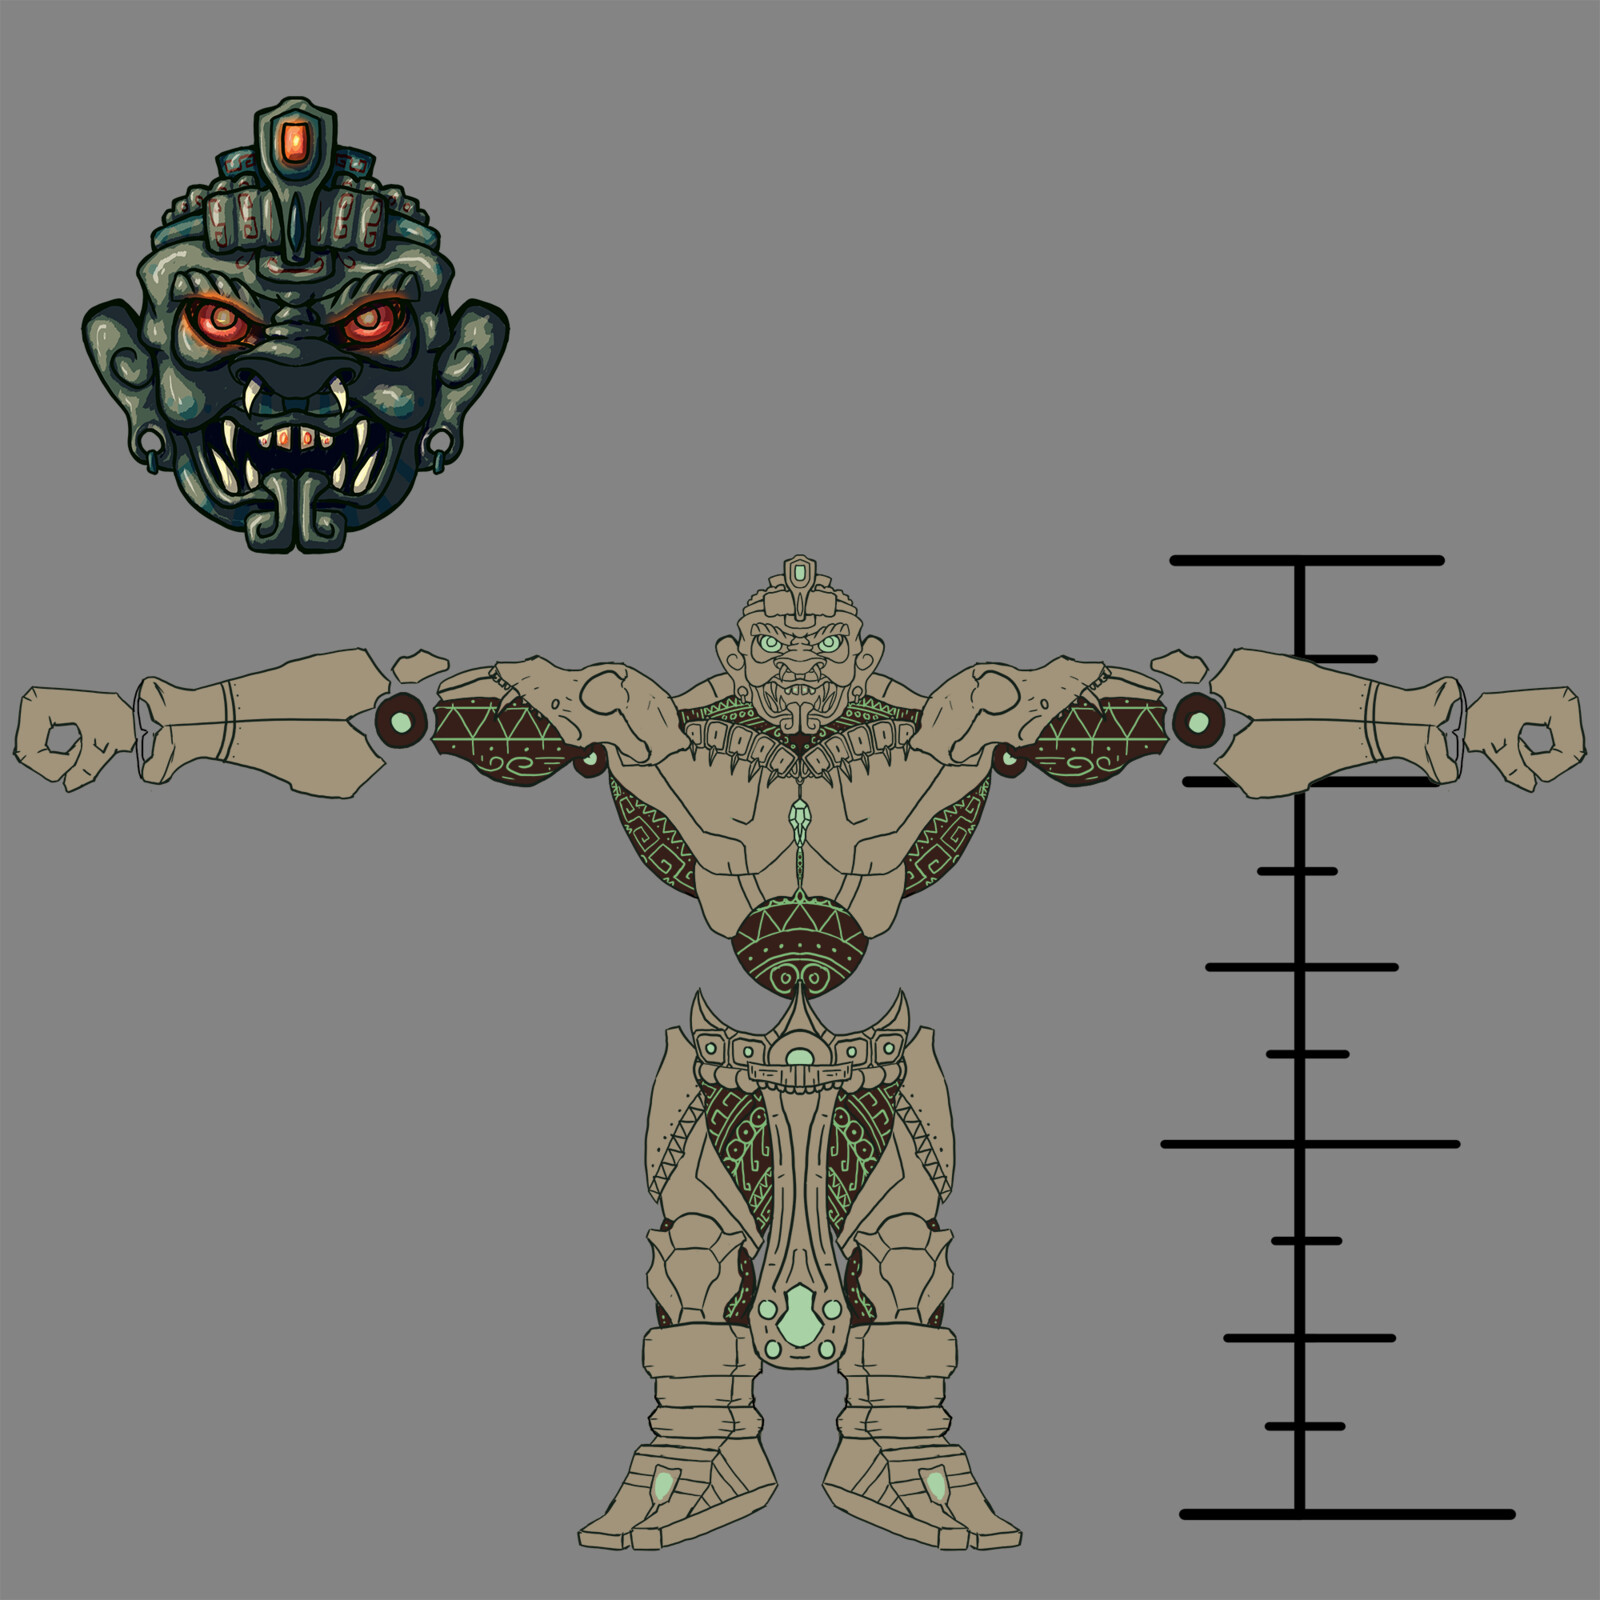 Modeling sheet (front view).